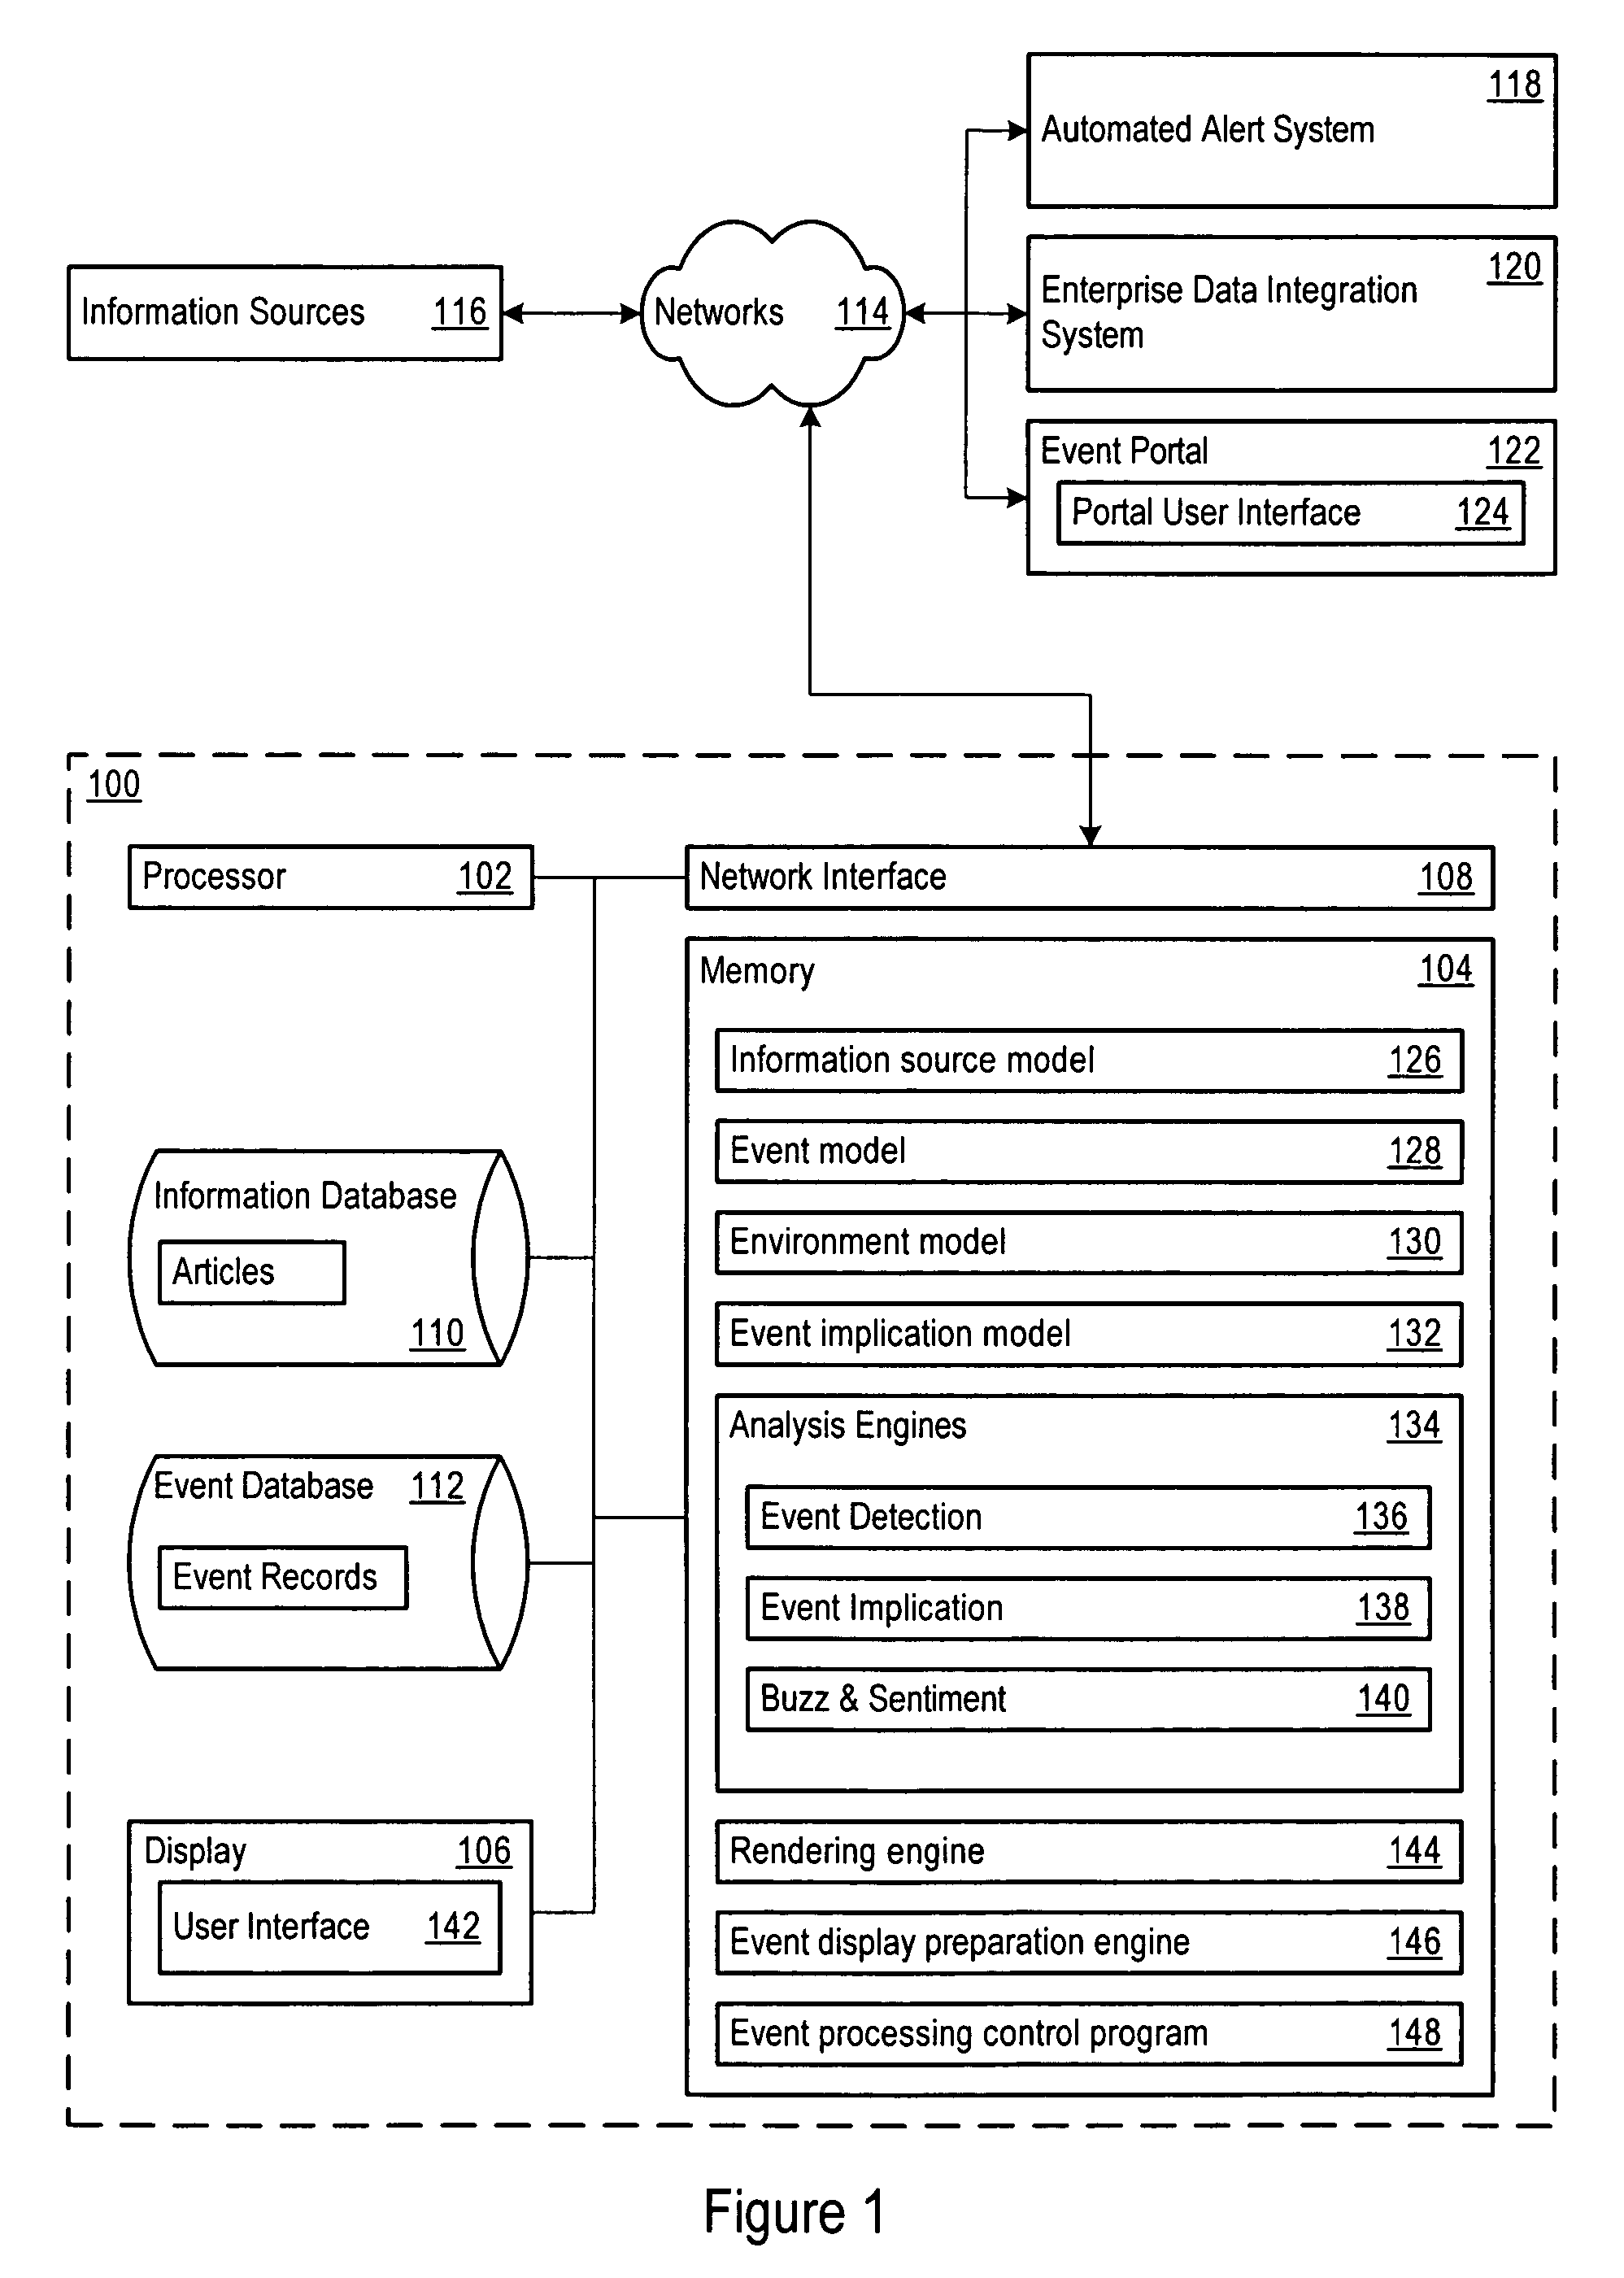 Model-driven event detection, implication, and reporting system